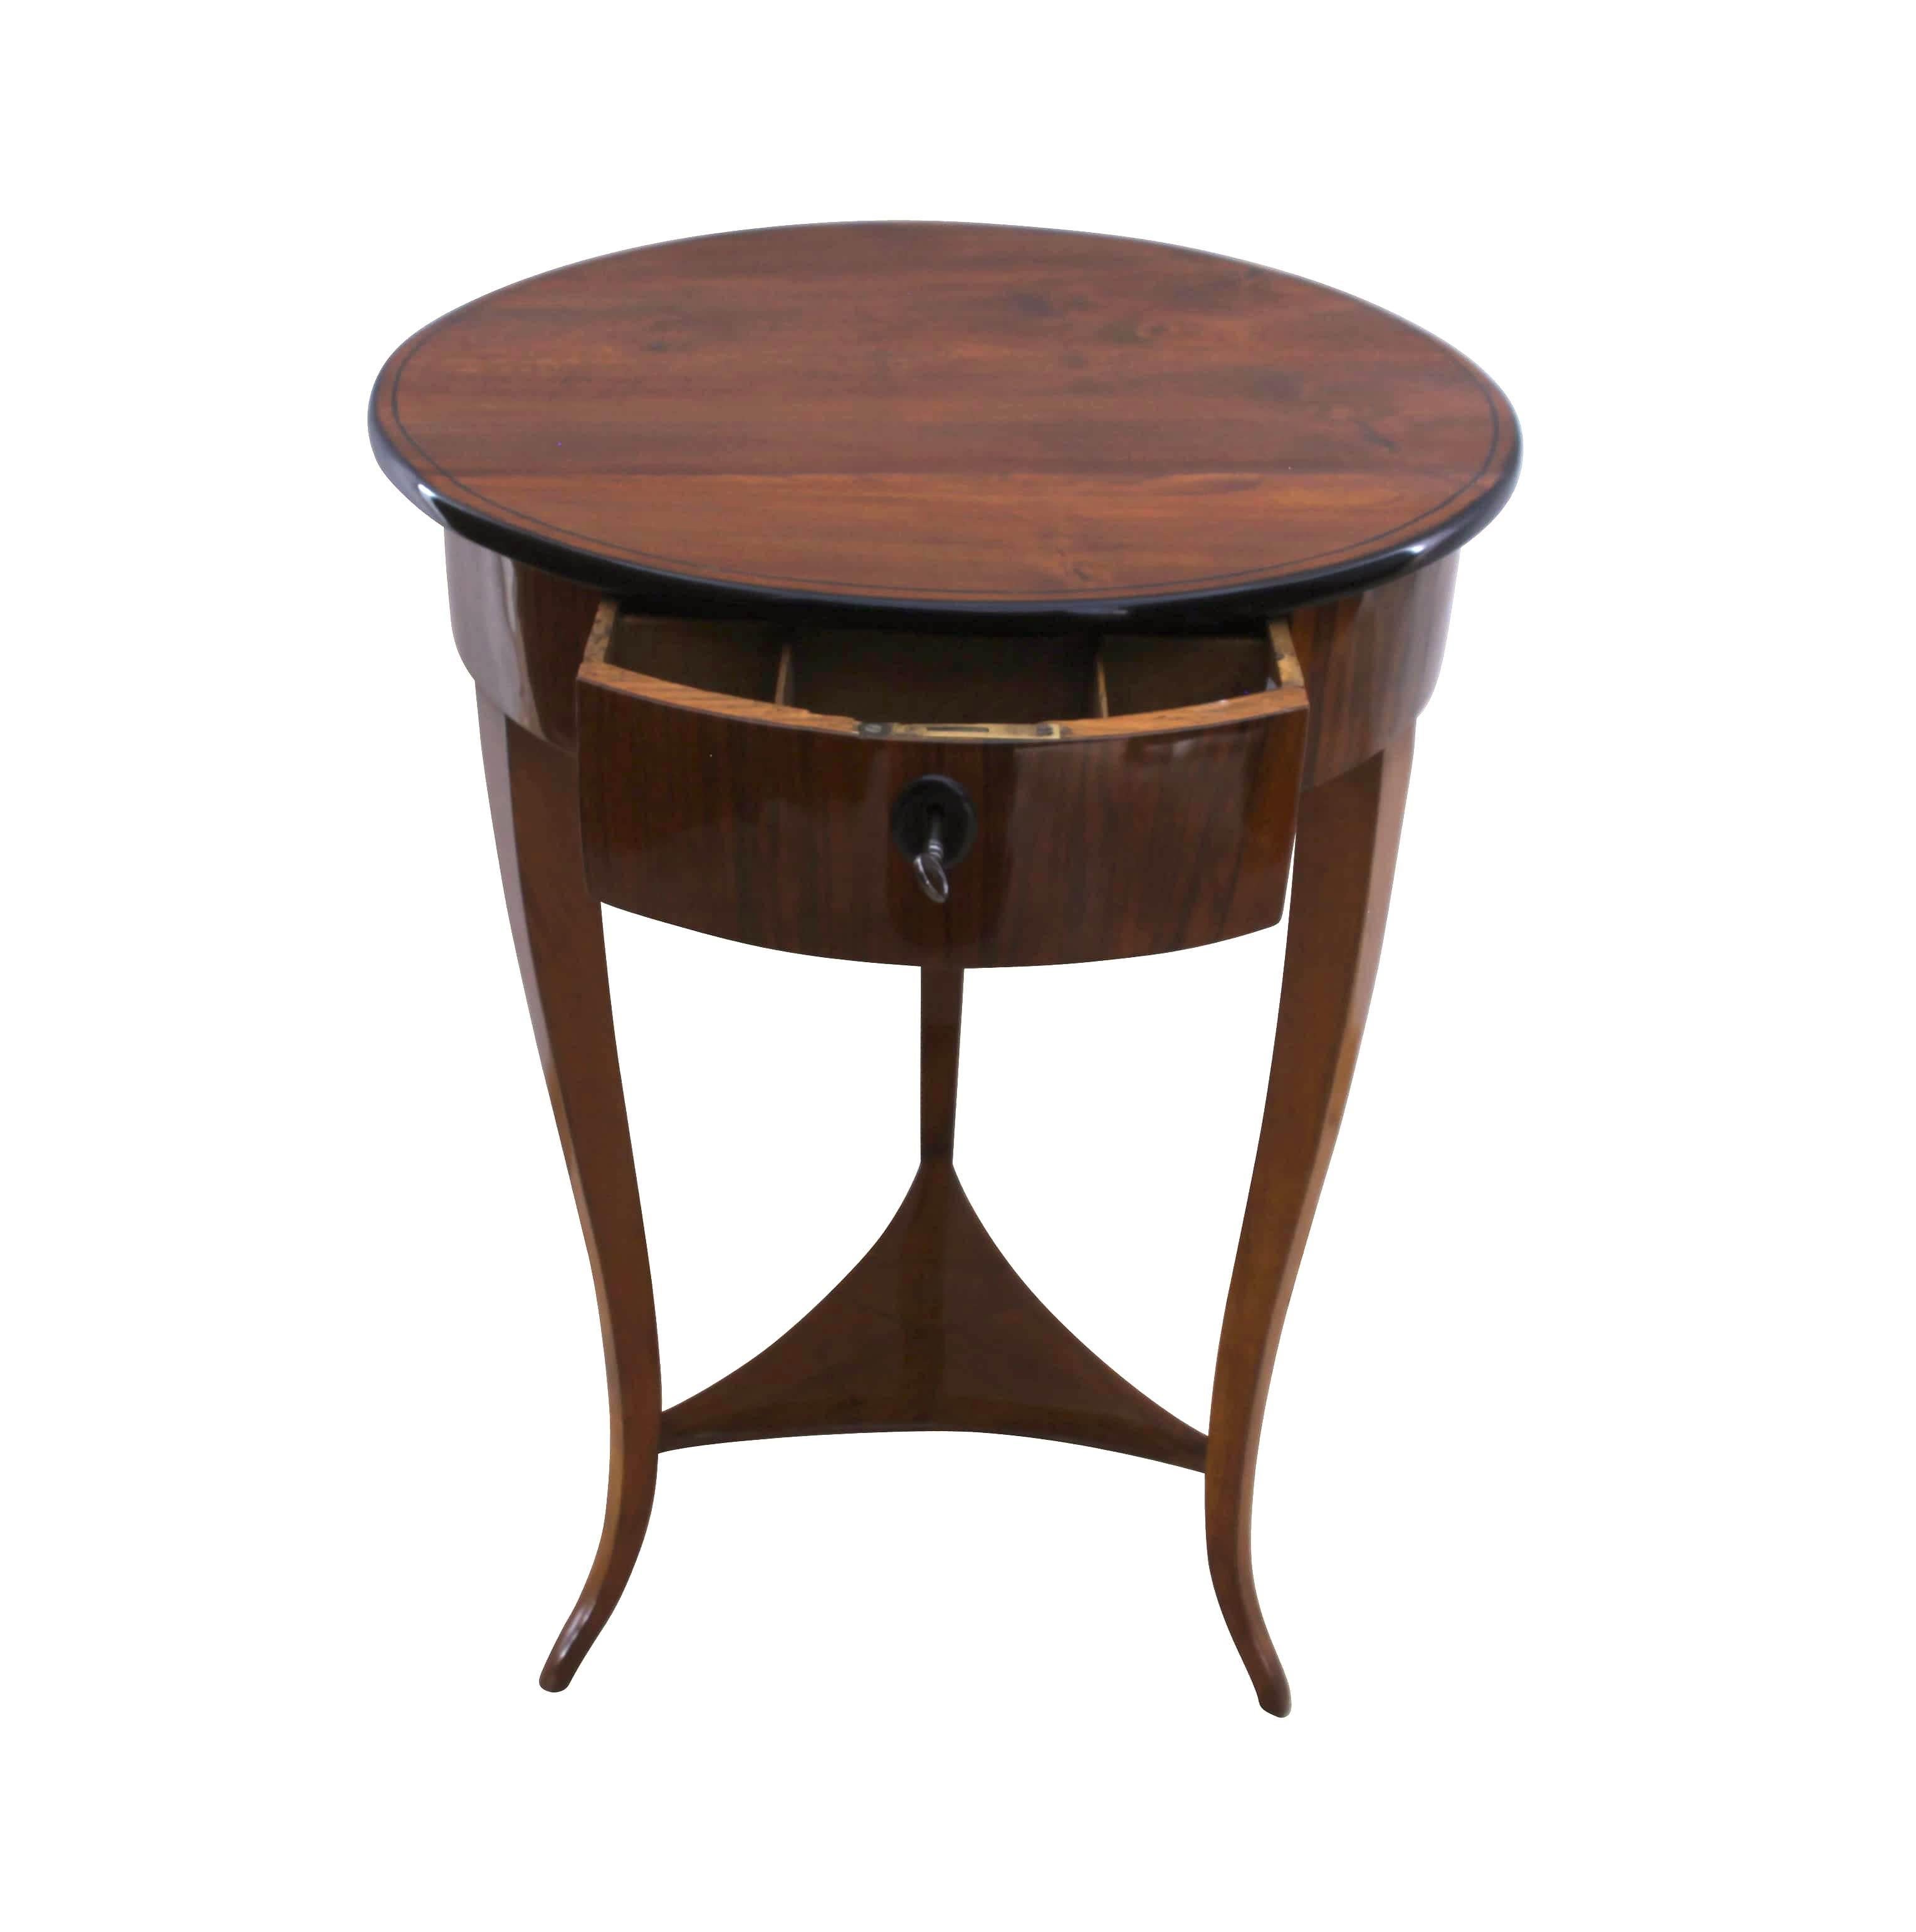 Round, elegant Biedermeier side table with drawer and middle plate.
Walnut veneered and solid wood.
Curved legs and ebonized edge and ink line.